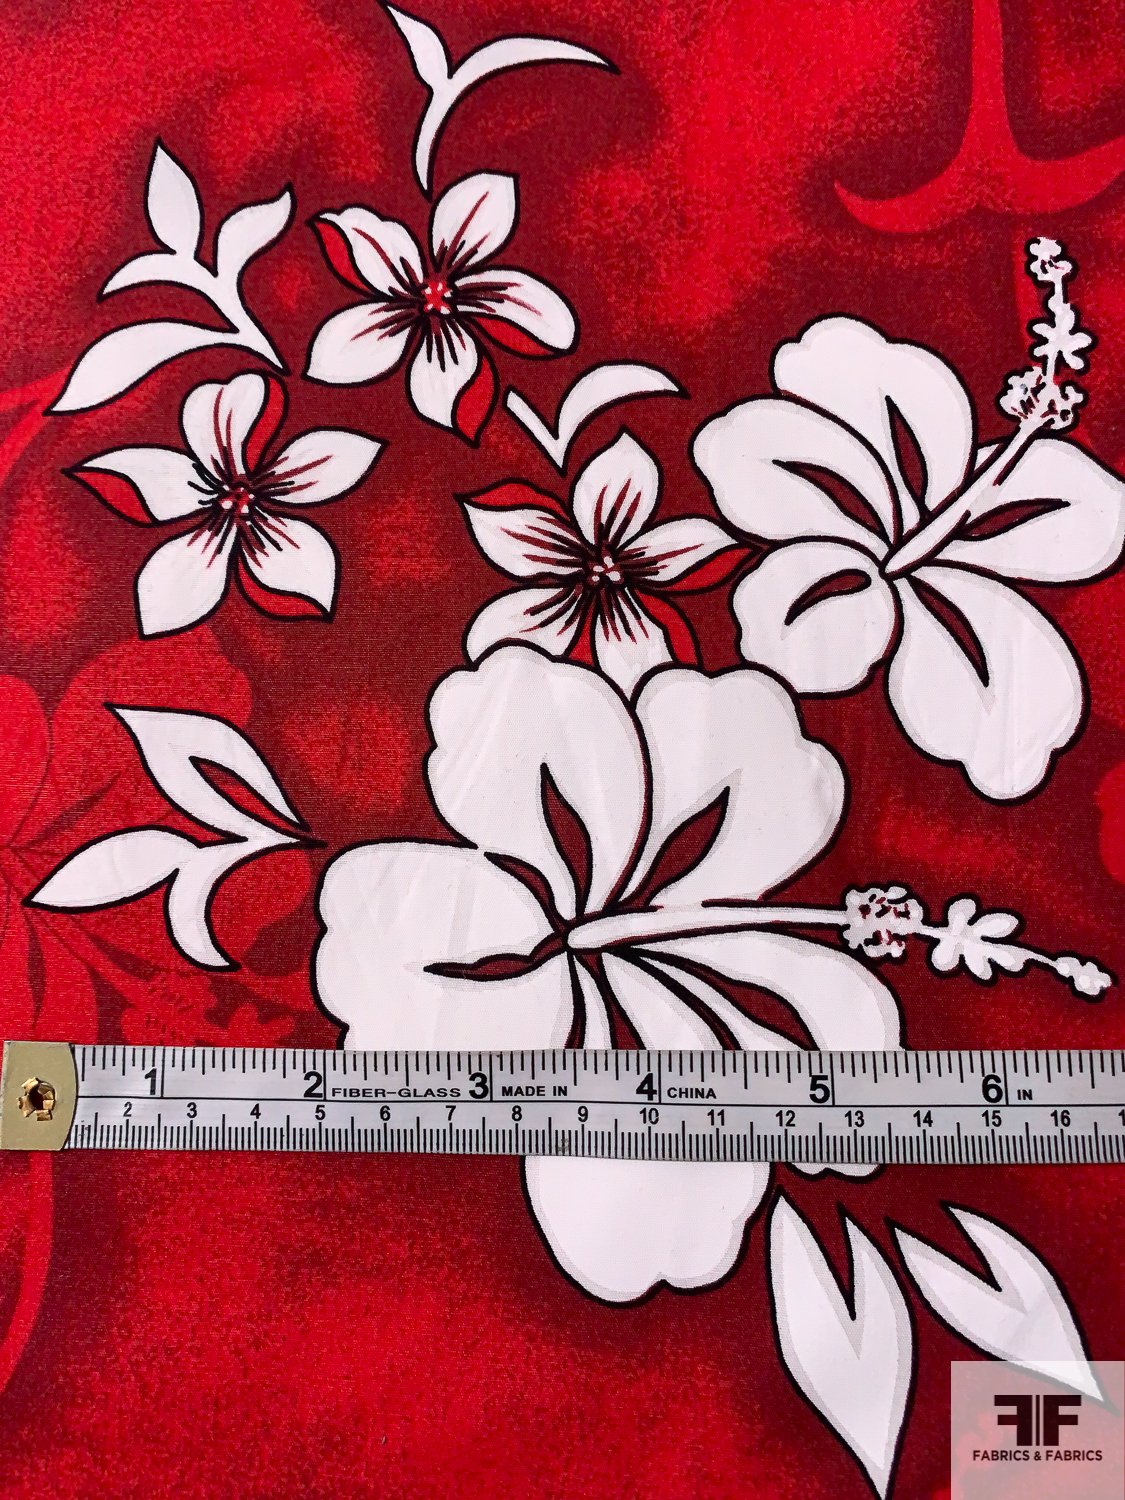 Spring Floral Fabric by the Yard. Quilting Cotton, Poplin, Organic